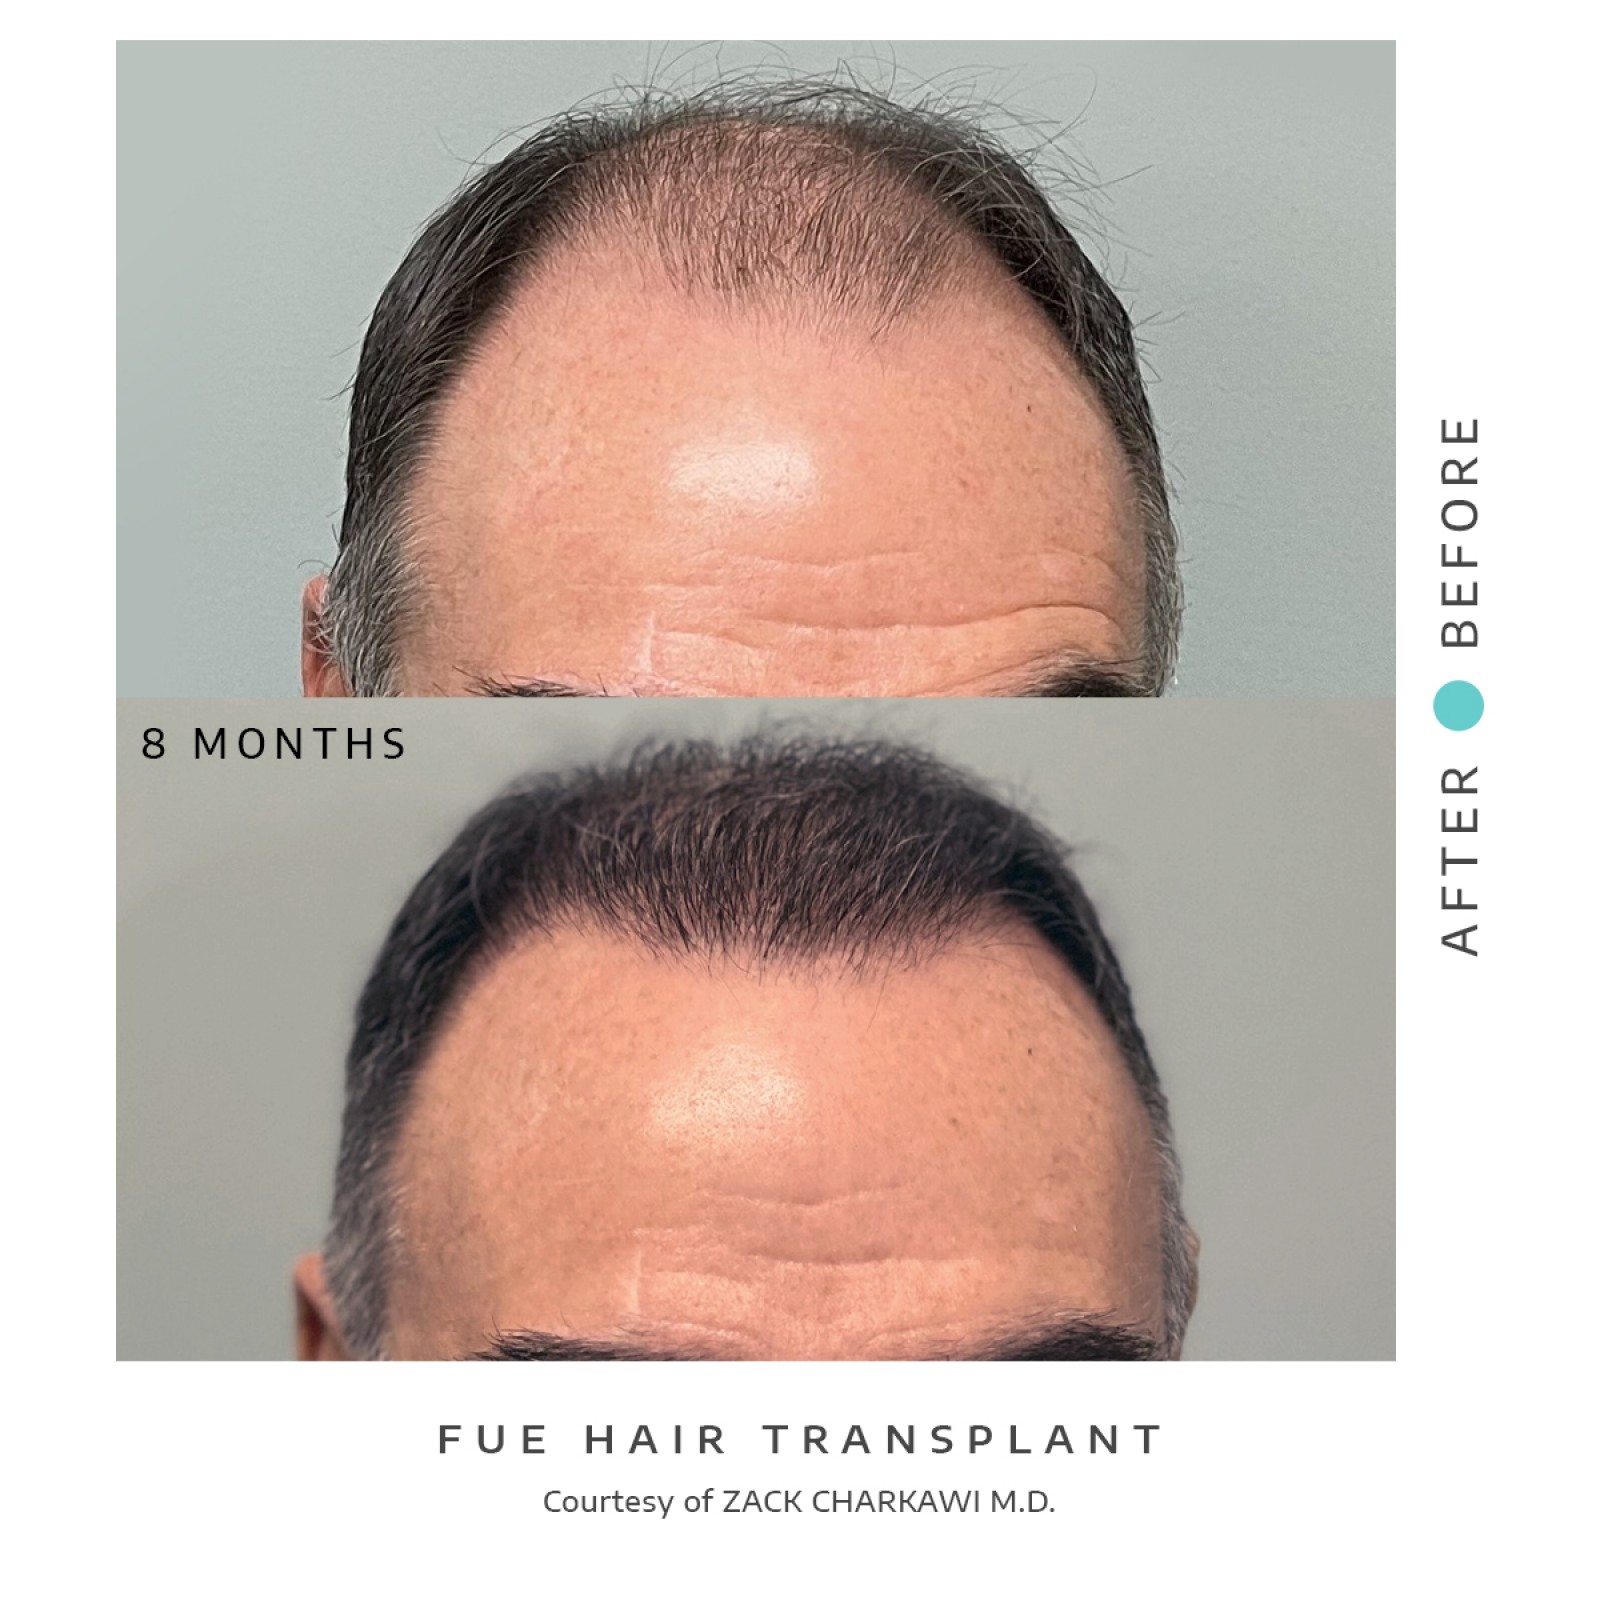 The before image shows balding and thinning hair with visible scalp patches. The after image shows a successful hair transplant with the scalp now covered in dense, natural-looking hair.